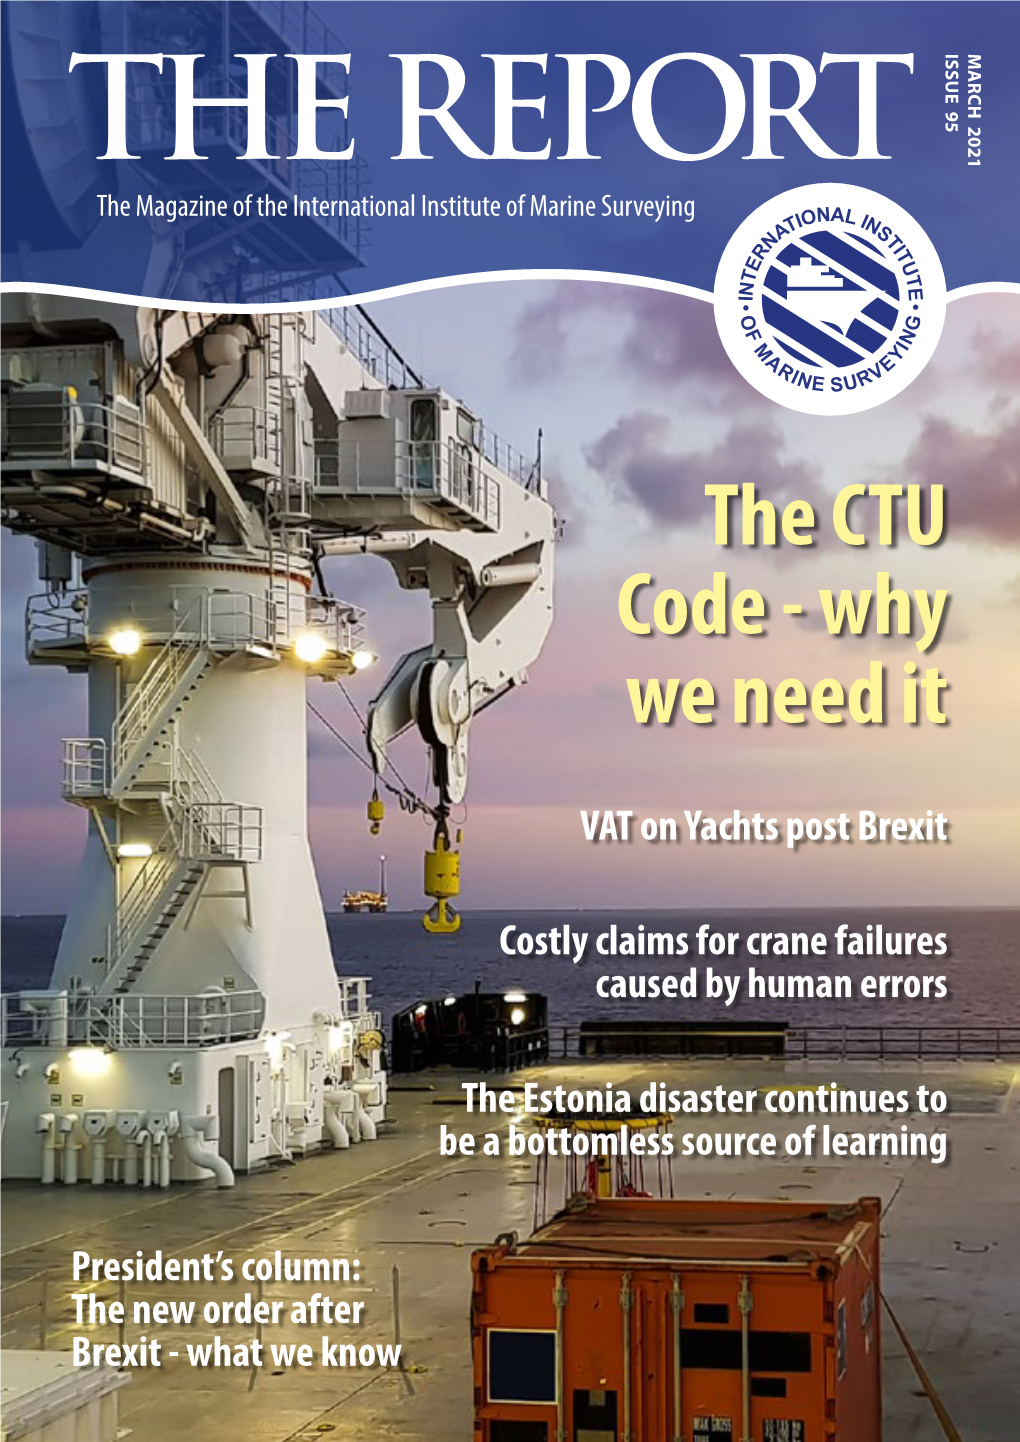 The Ctu Code – the Incident of Grounding Why We Need It of M.V